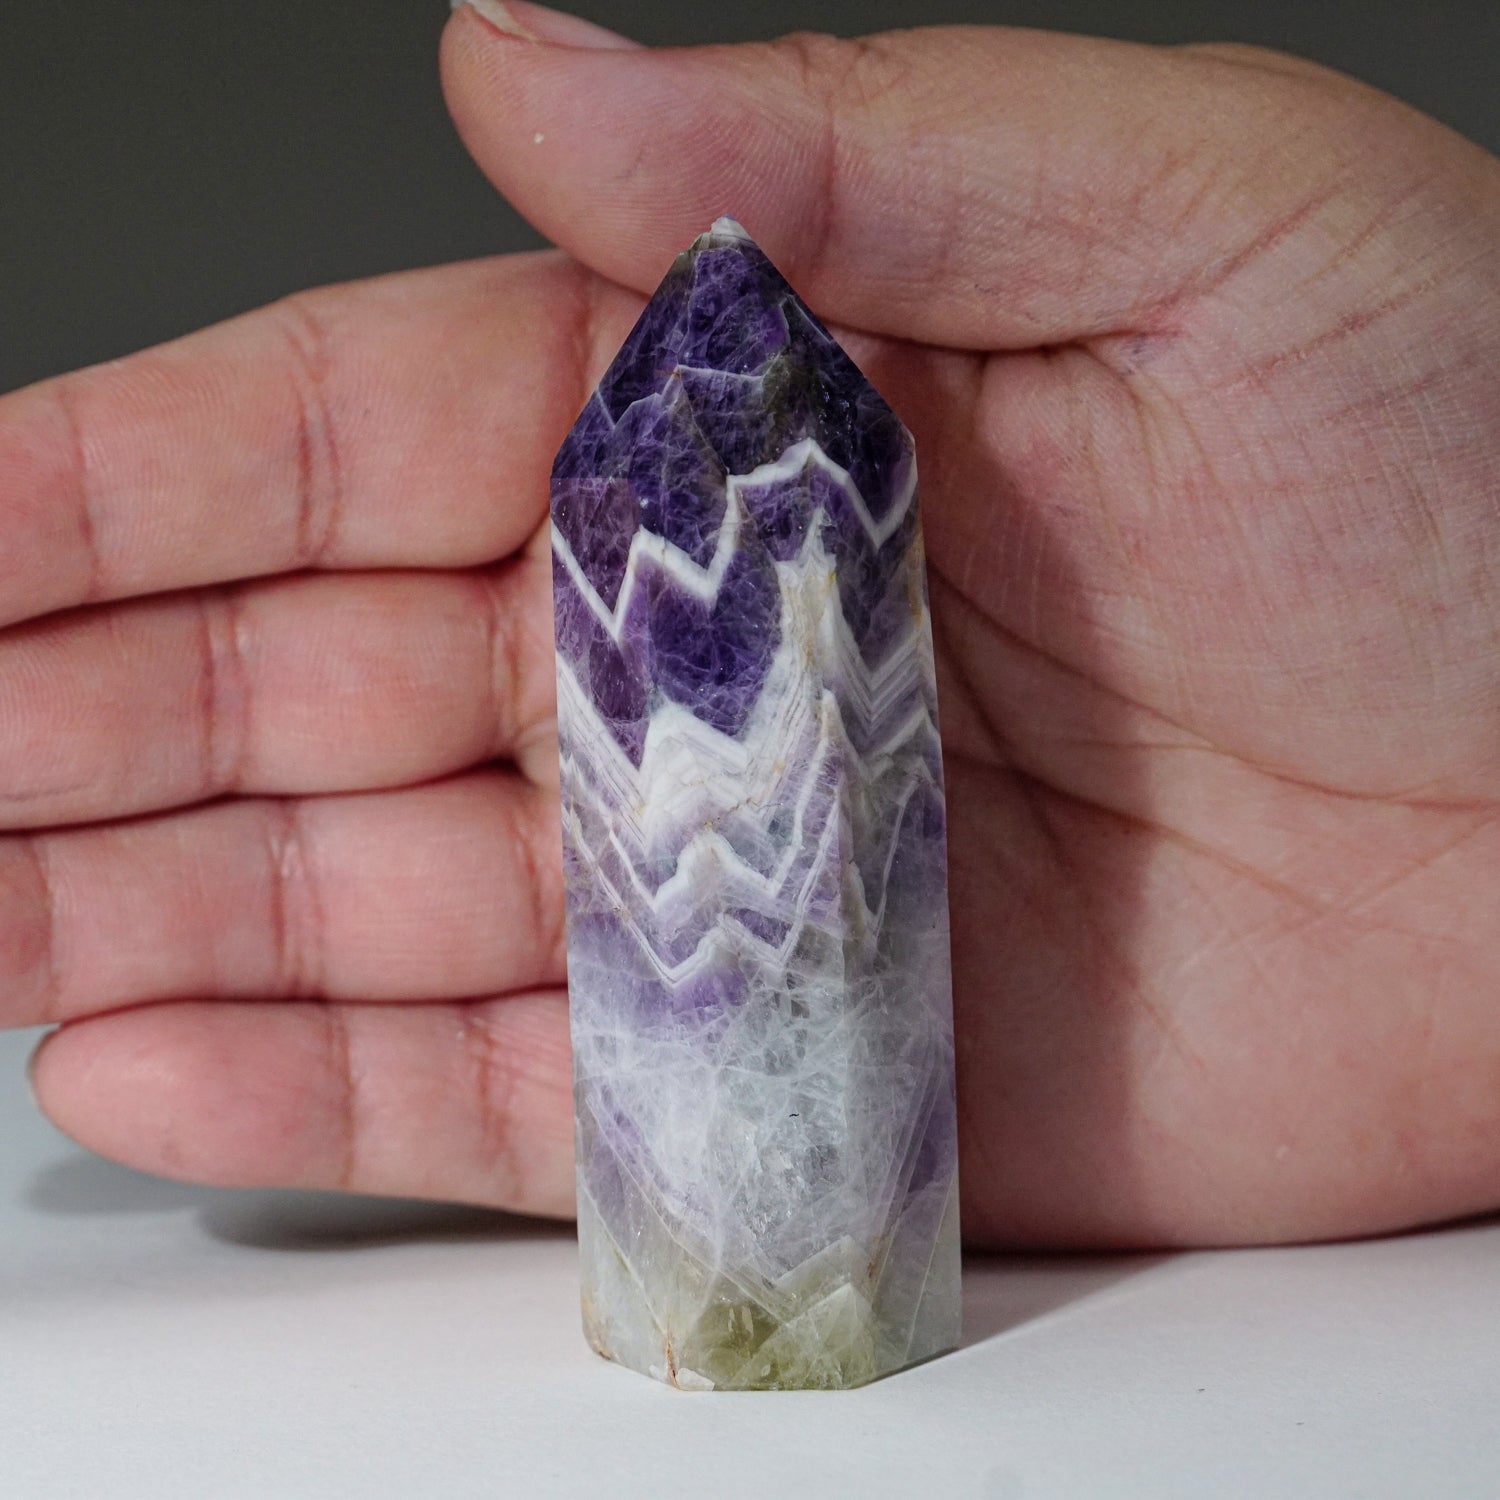 Polished Chevron Amethyst Point from Brazil (97 grams)